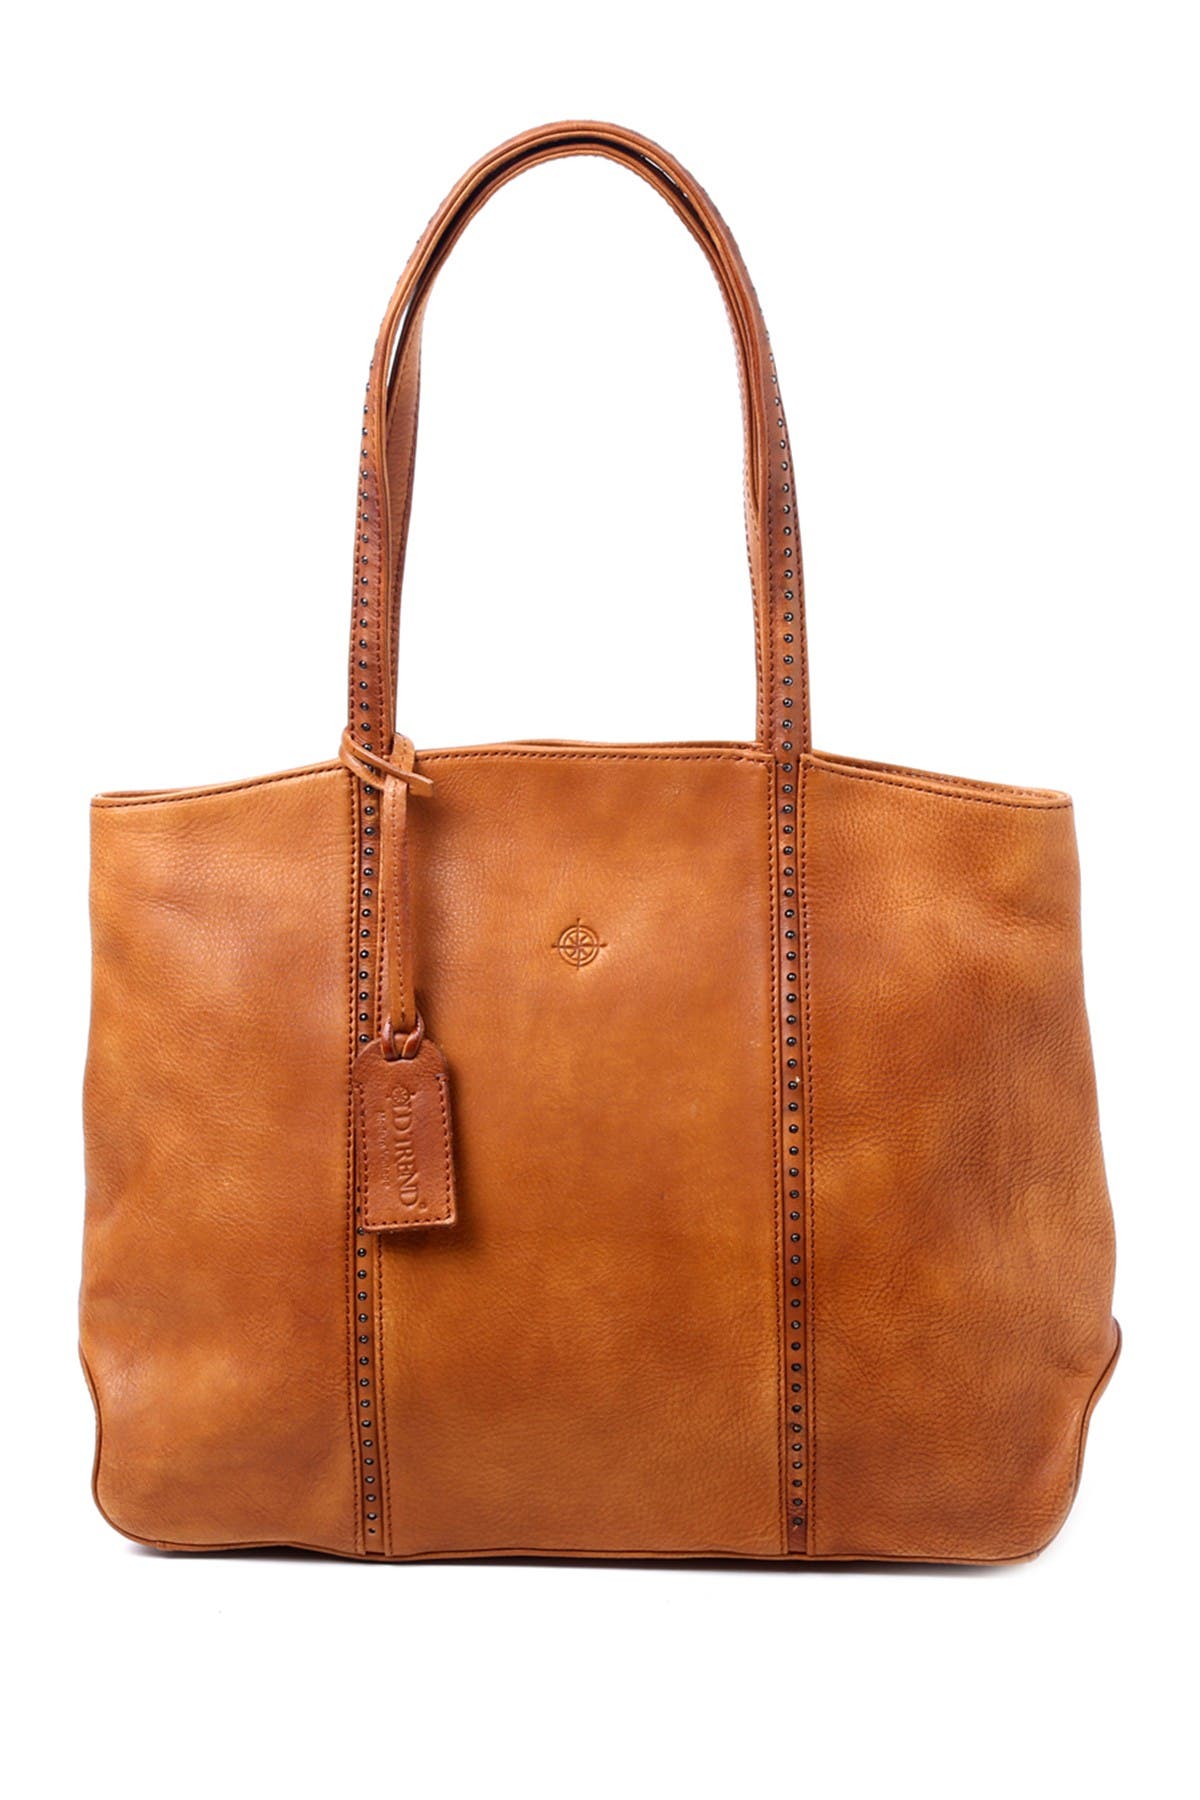 OLD TREND DANCING BAMBOO LEATHER TOTE BAG,852676969460